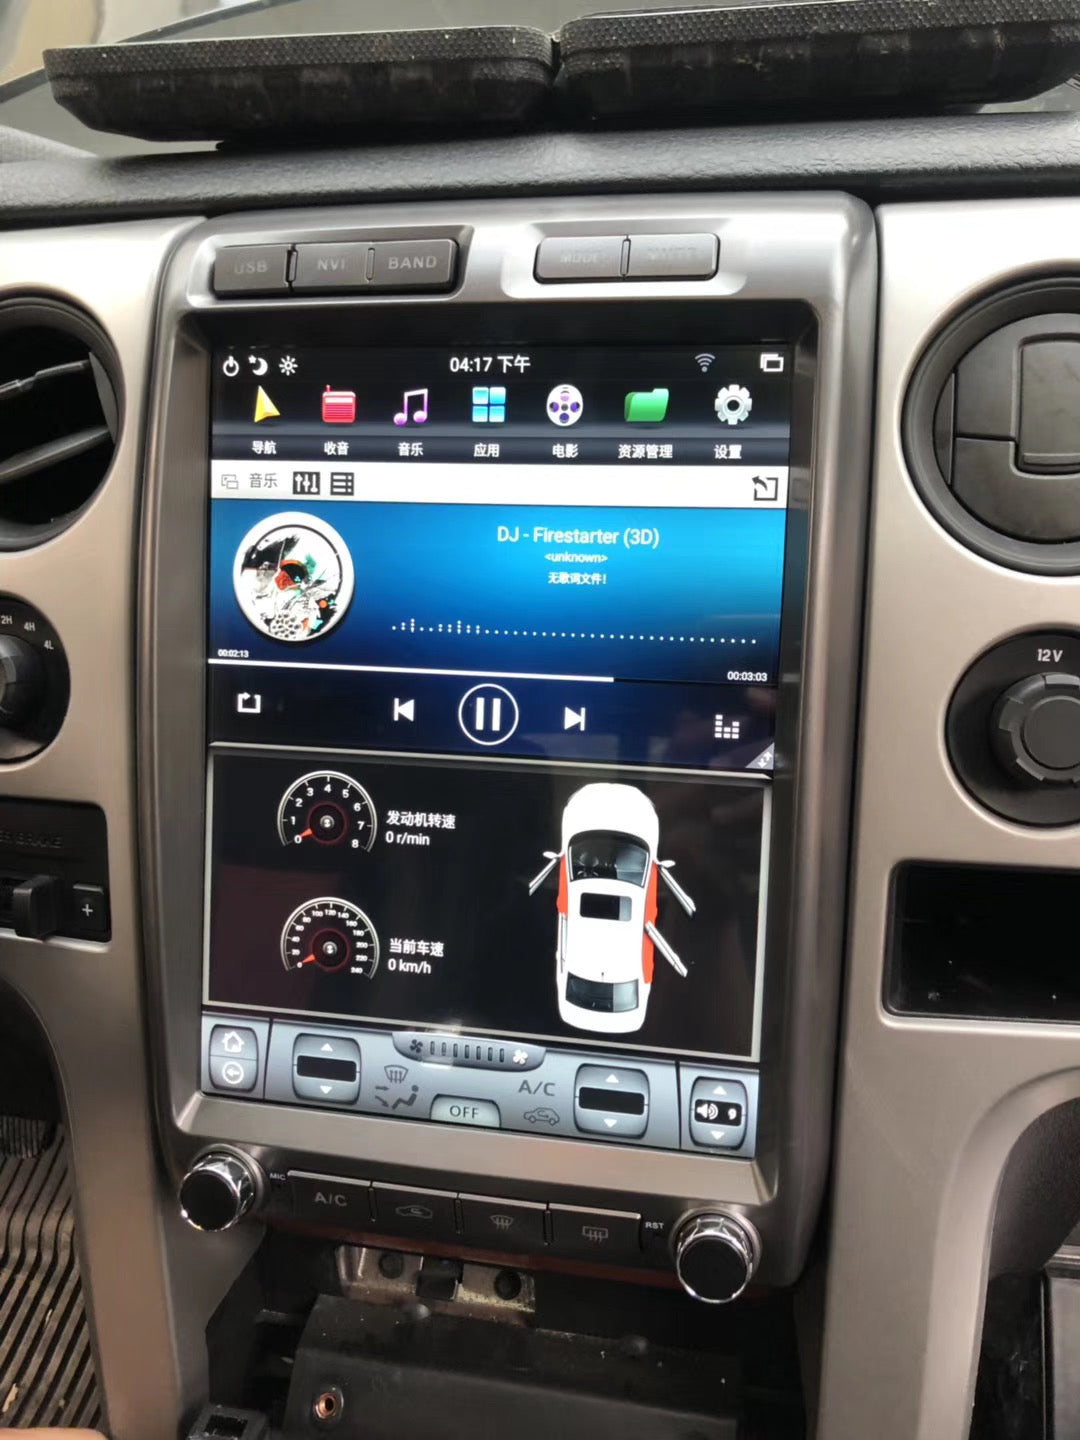 2010 ford f150 stereo sync upgrade